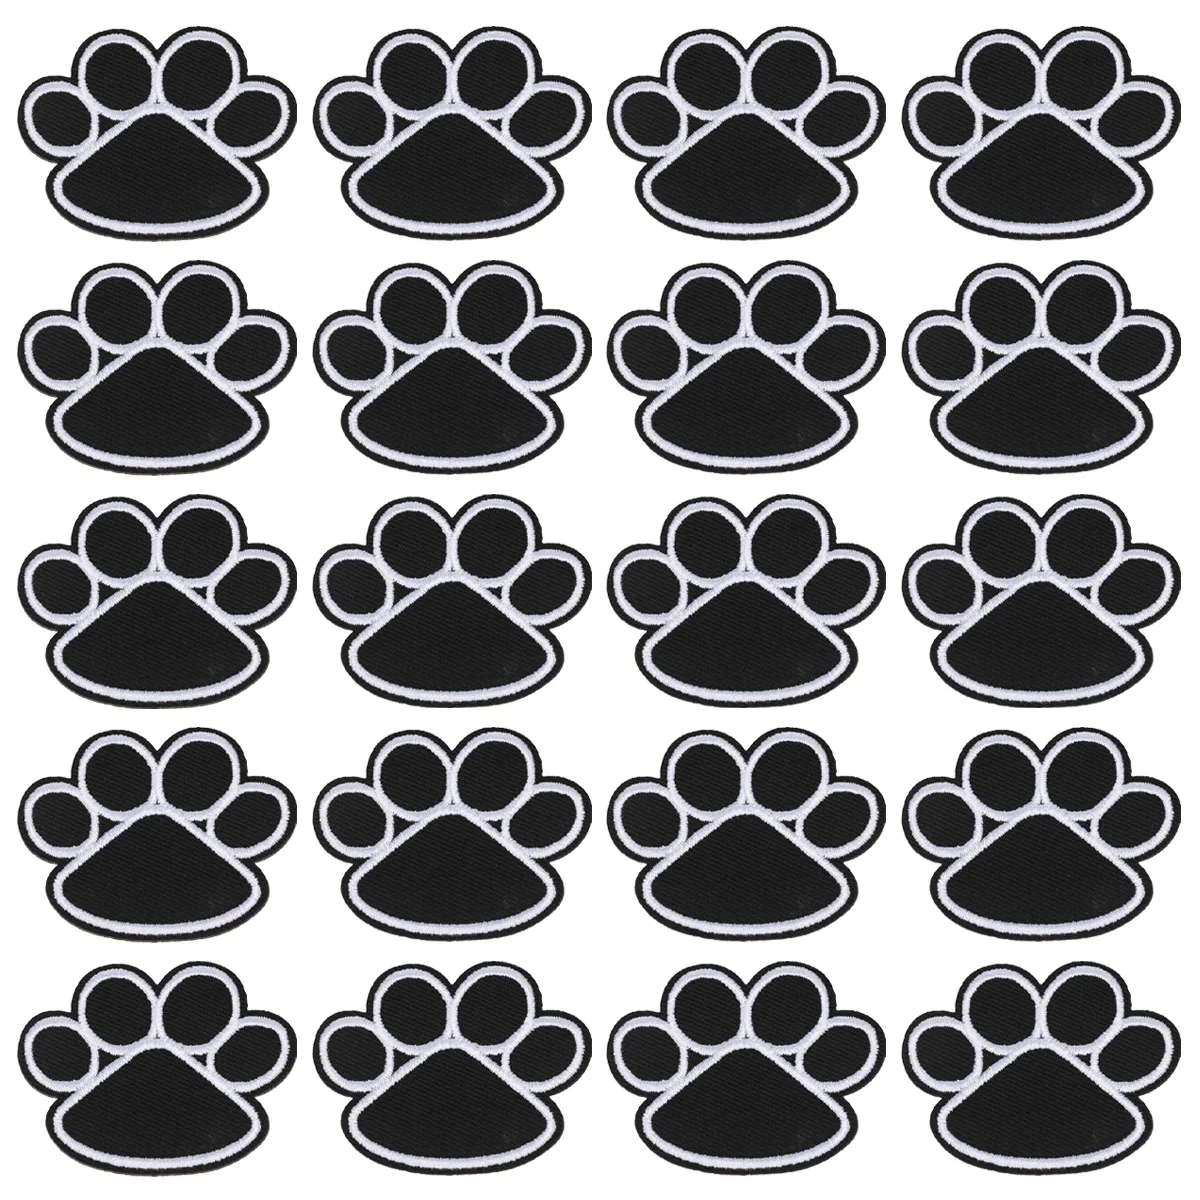 

On Patch Dog Paw Iron Clothes Embroidery Applique Sewingembroidered Sew Appliques Badges Backpack Stickers Clothing Jackets